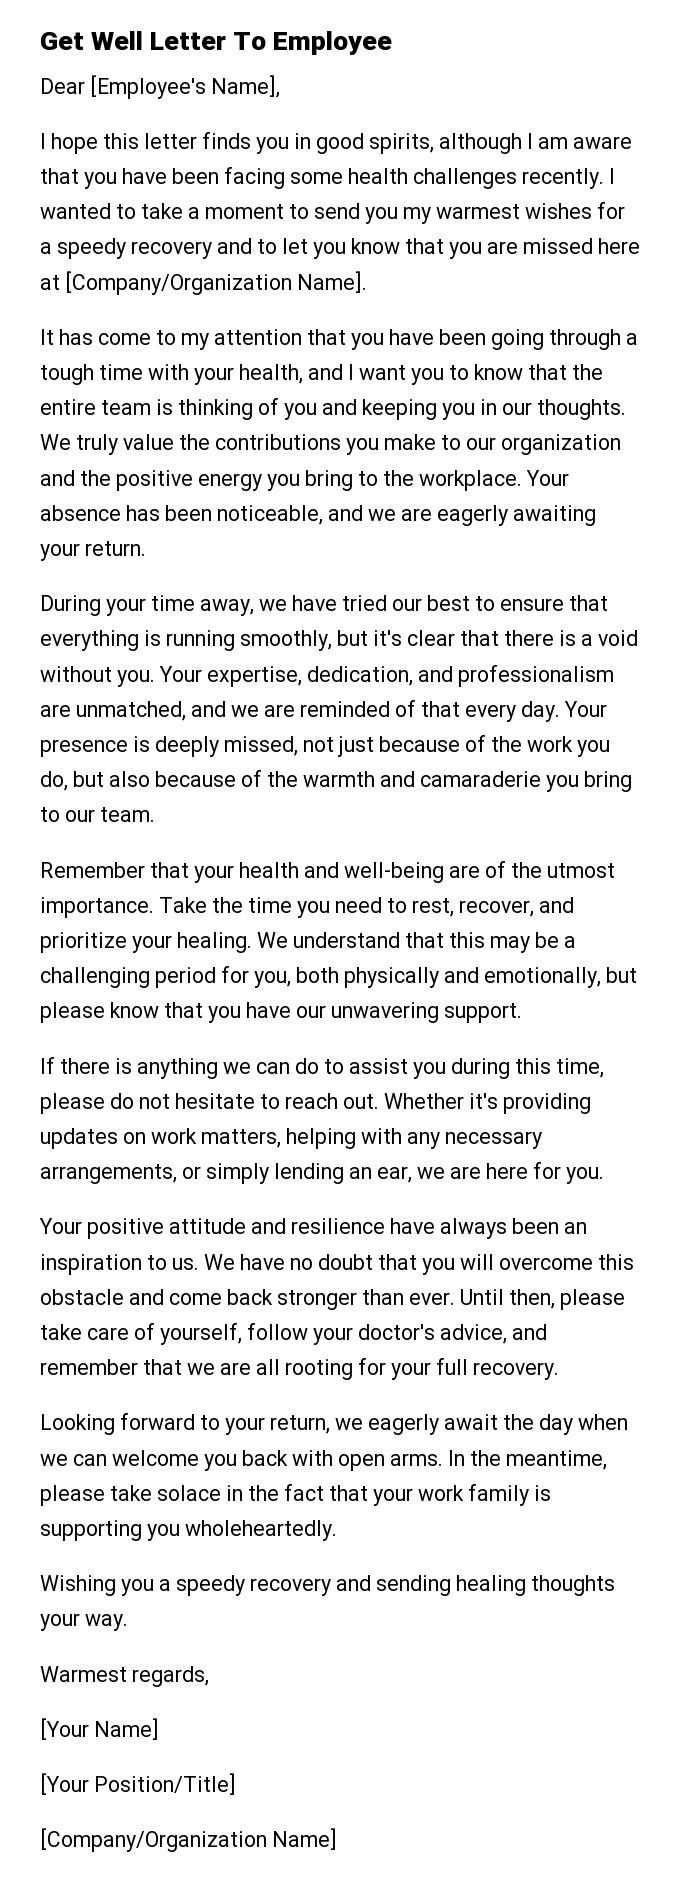 Get Well Letter To Employee